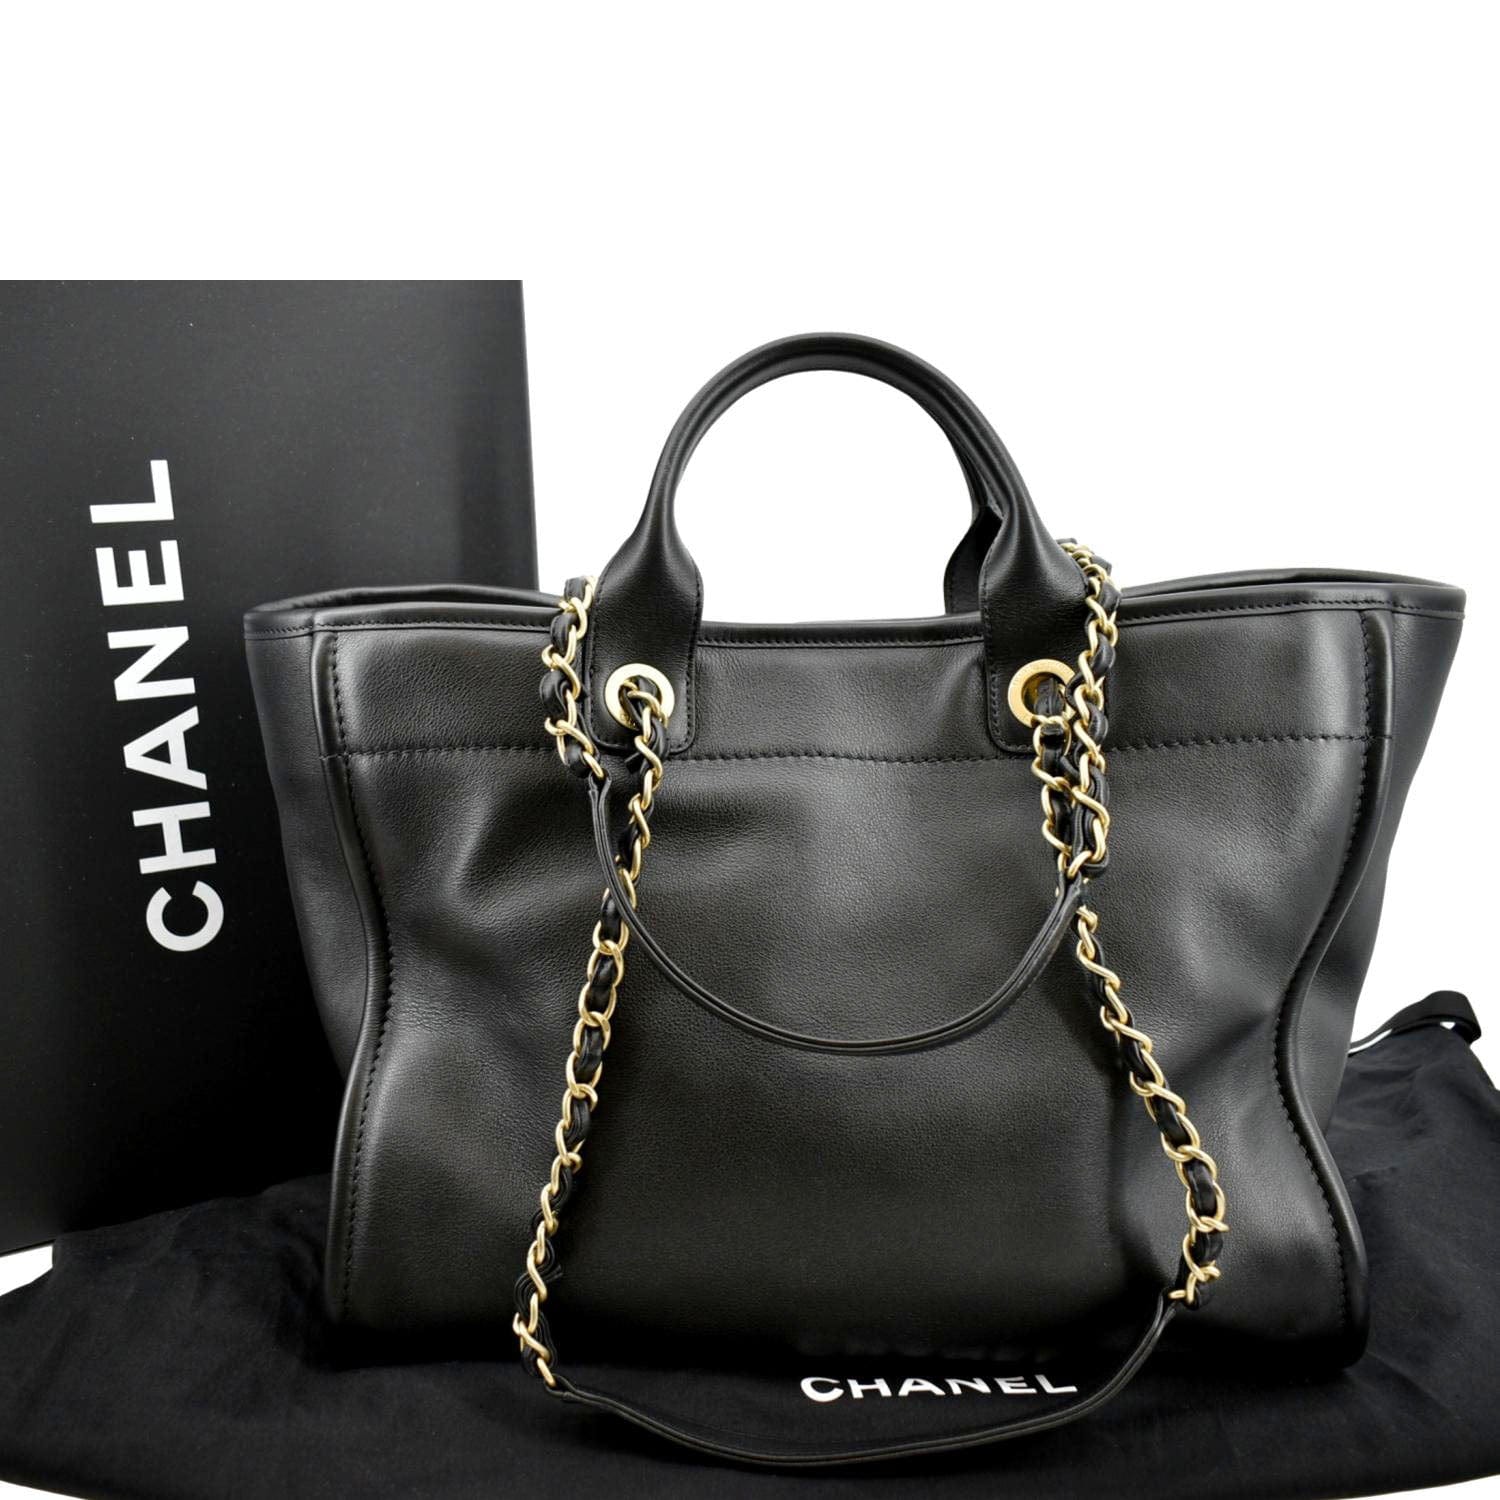 Chanel deauville tote bag